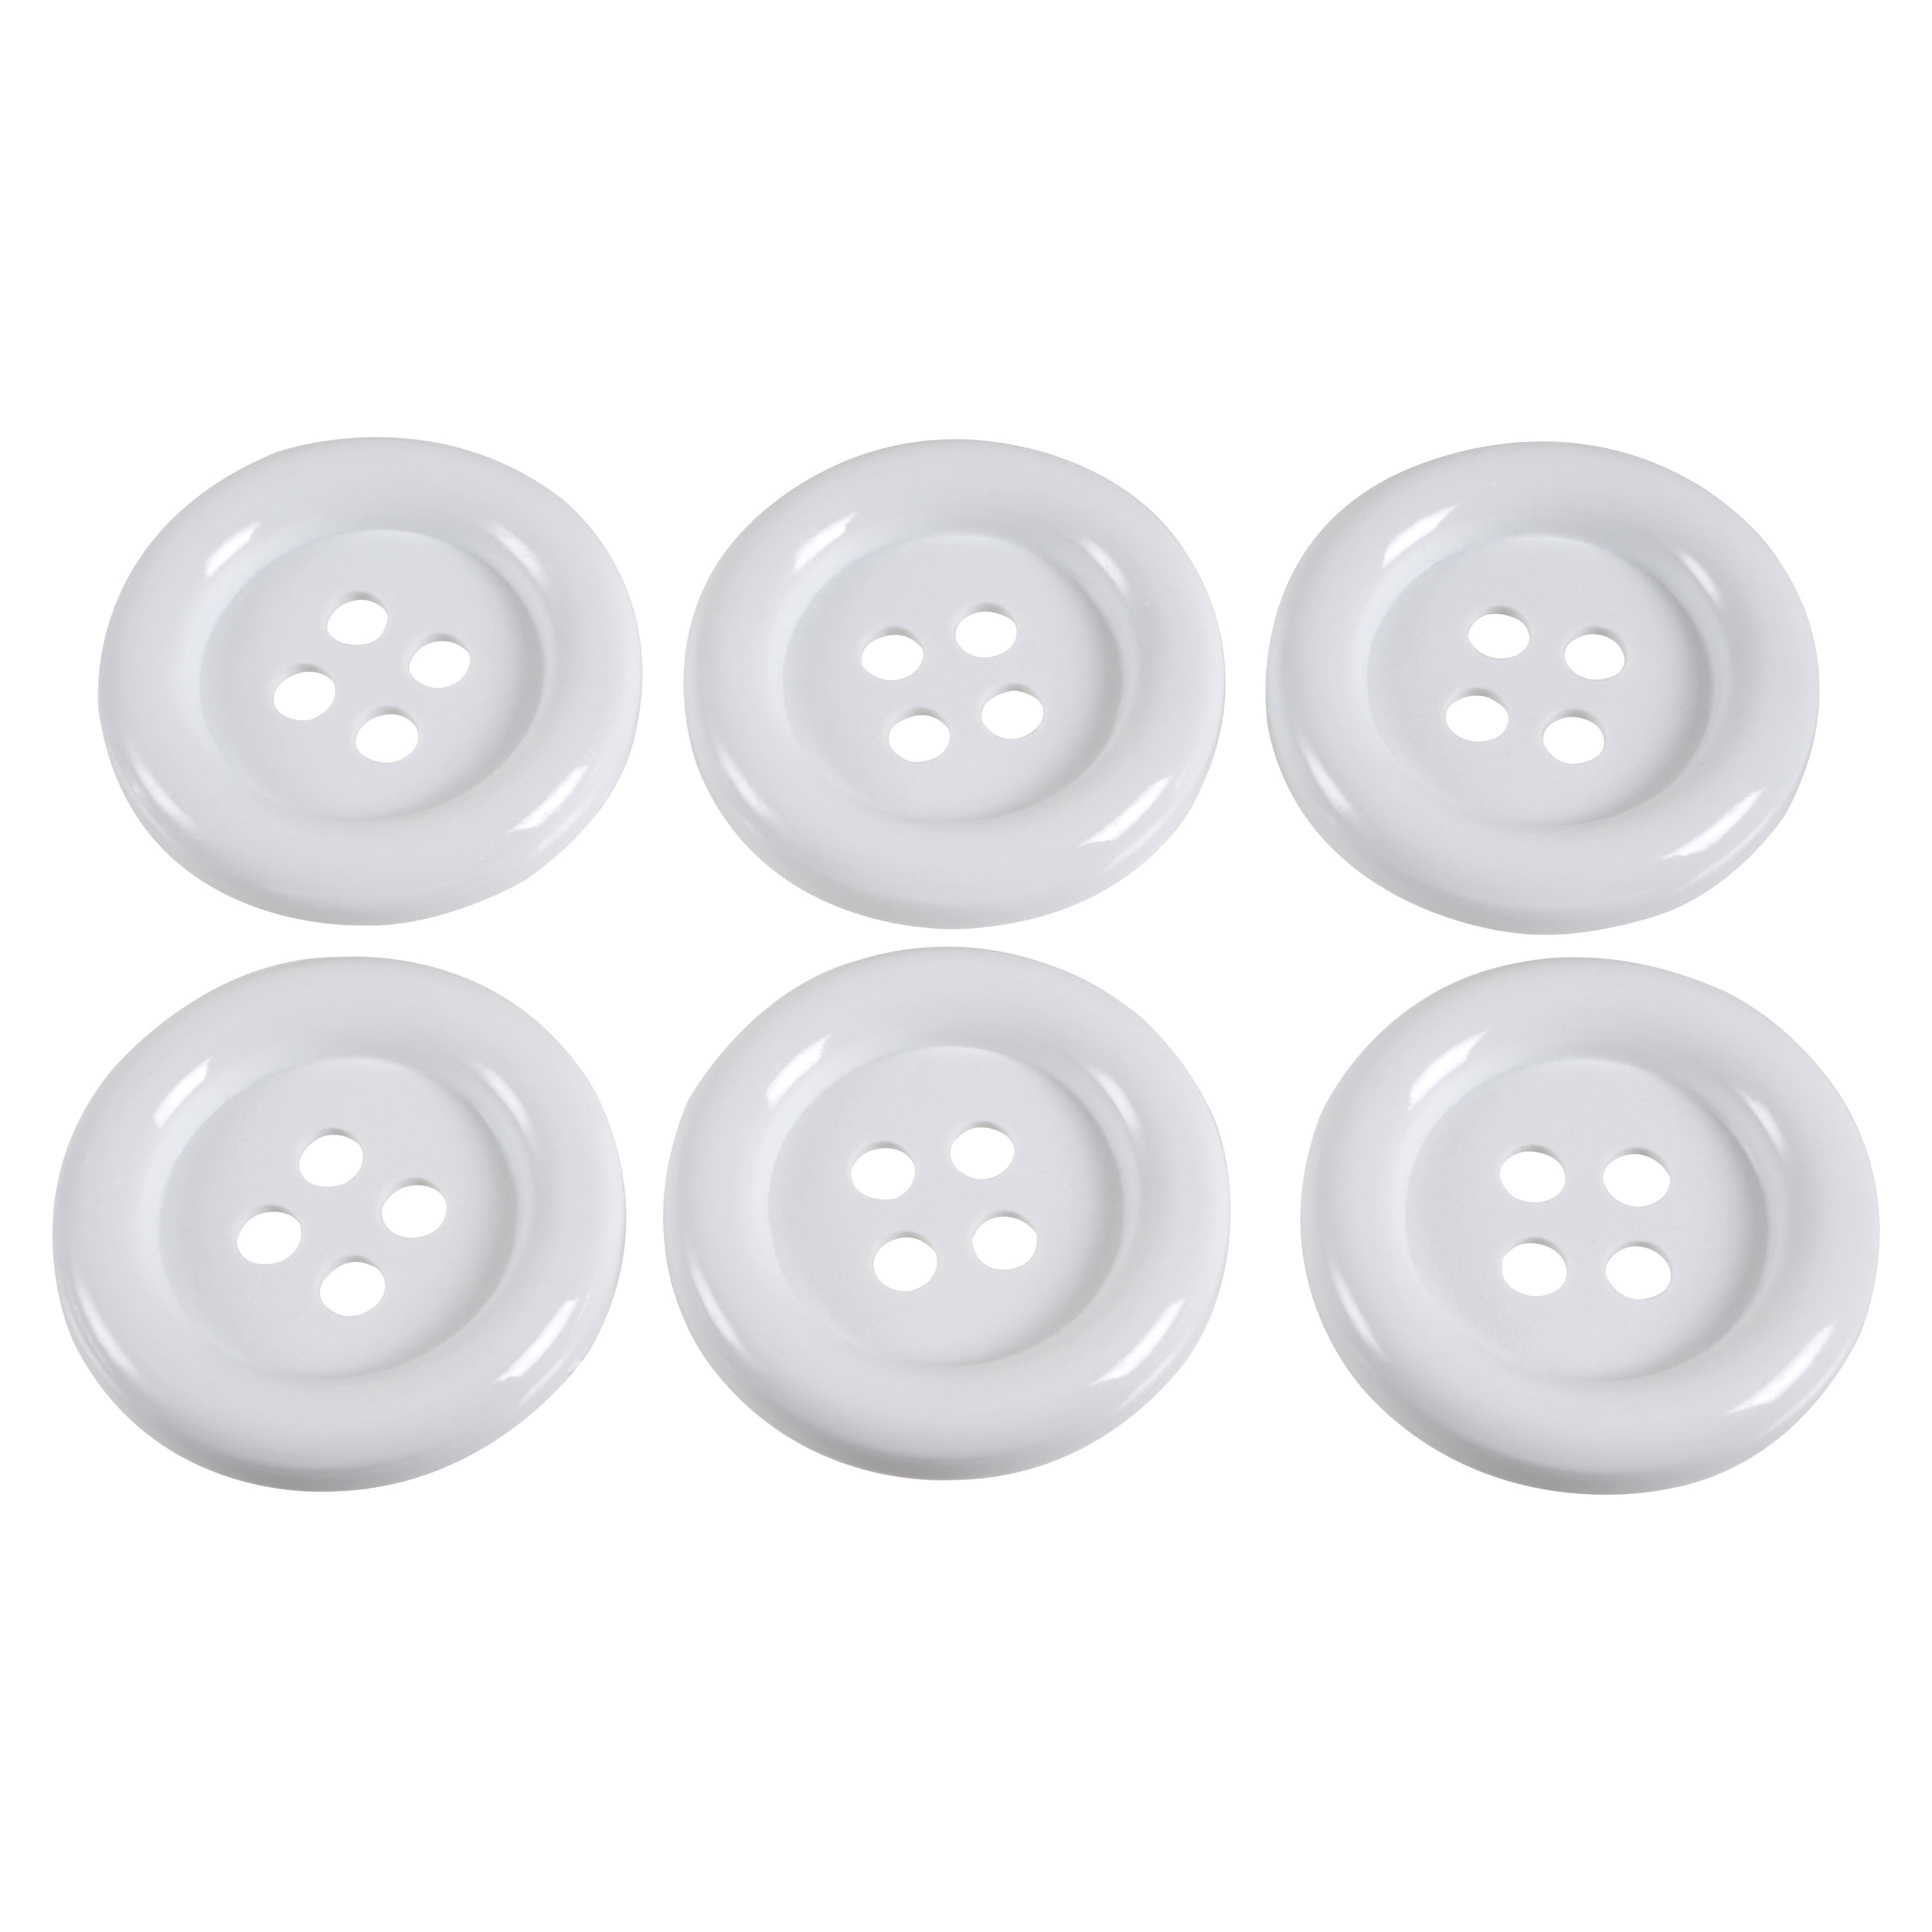 Different Sizes of White Buttons, Qty 20, Just Another Button Company